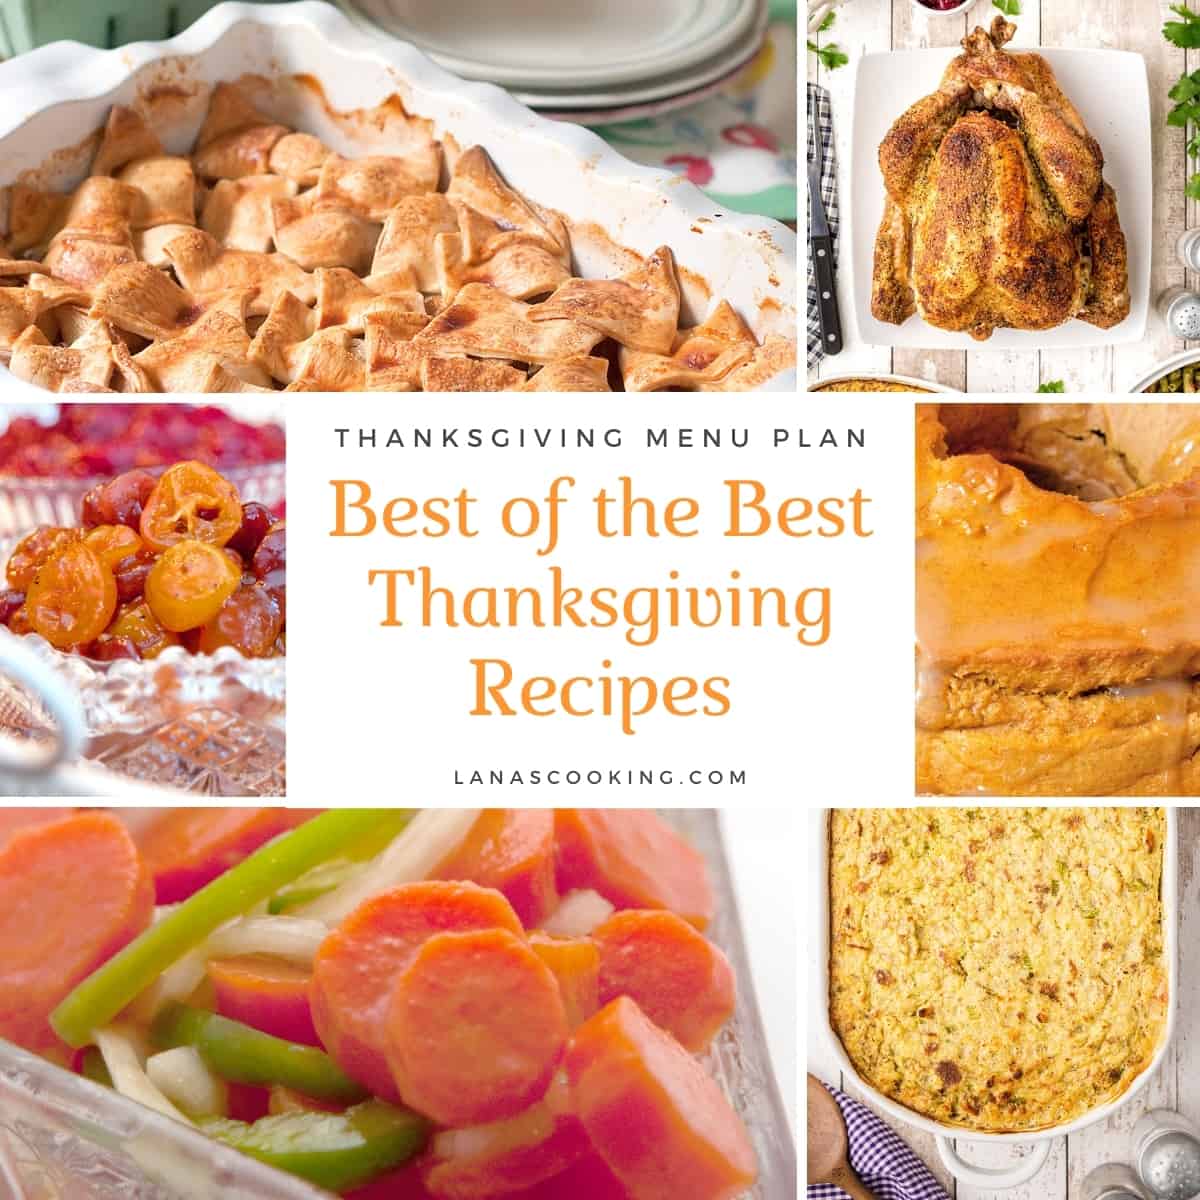 Best of the Best Thanksgiving Recipes